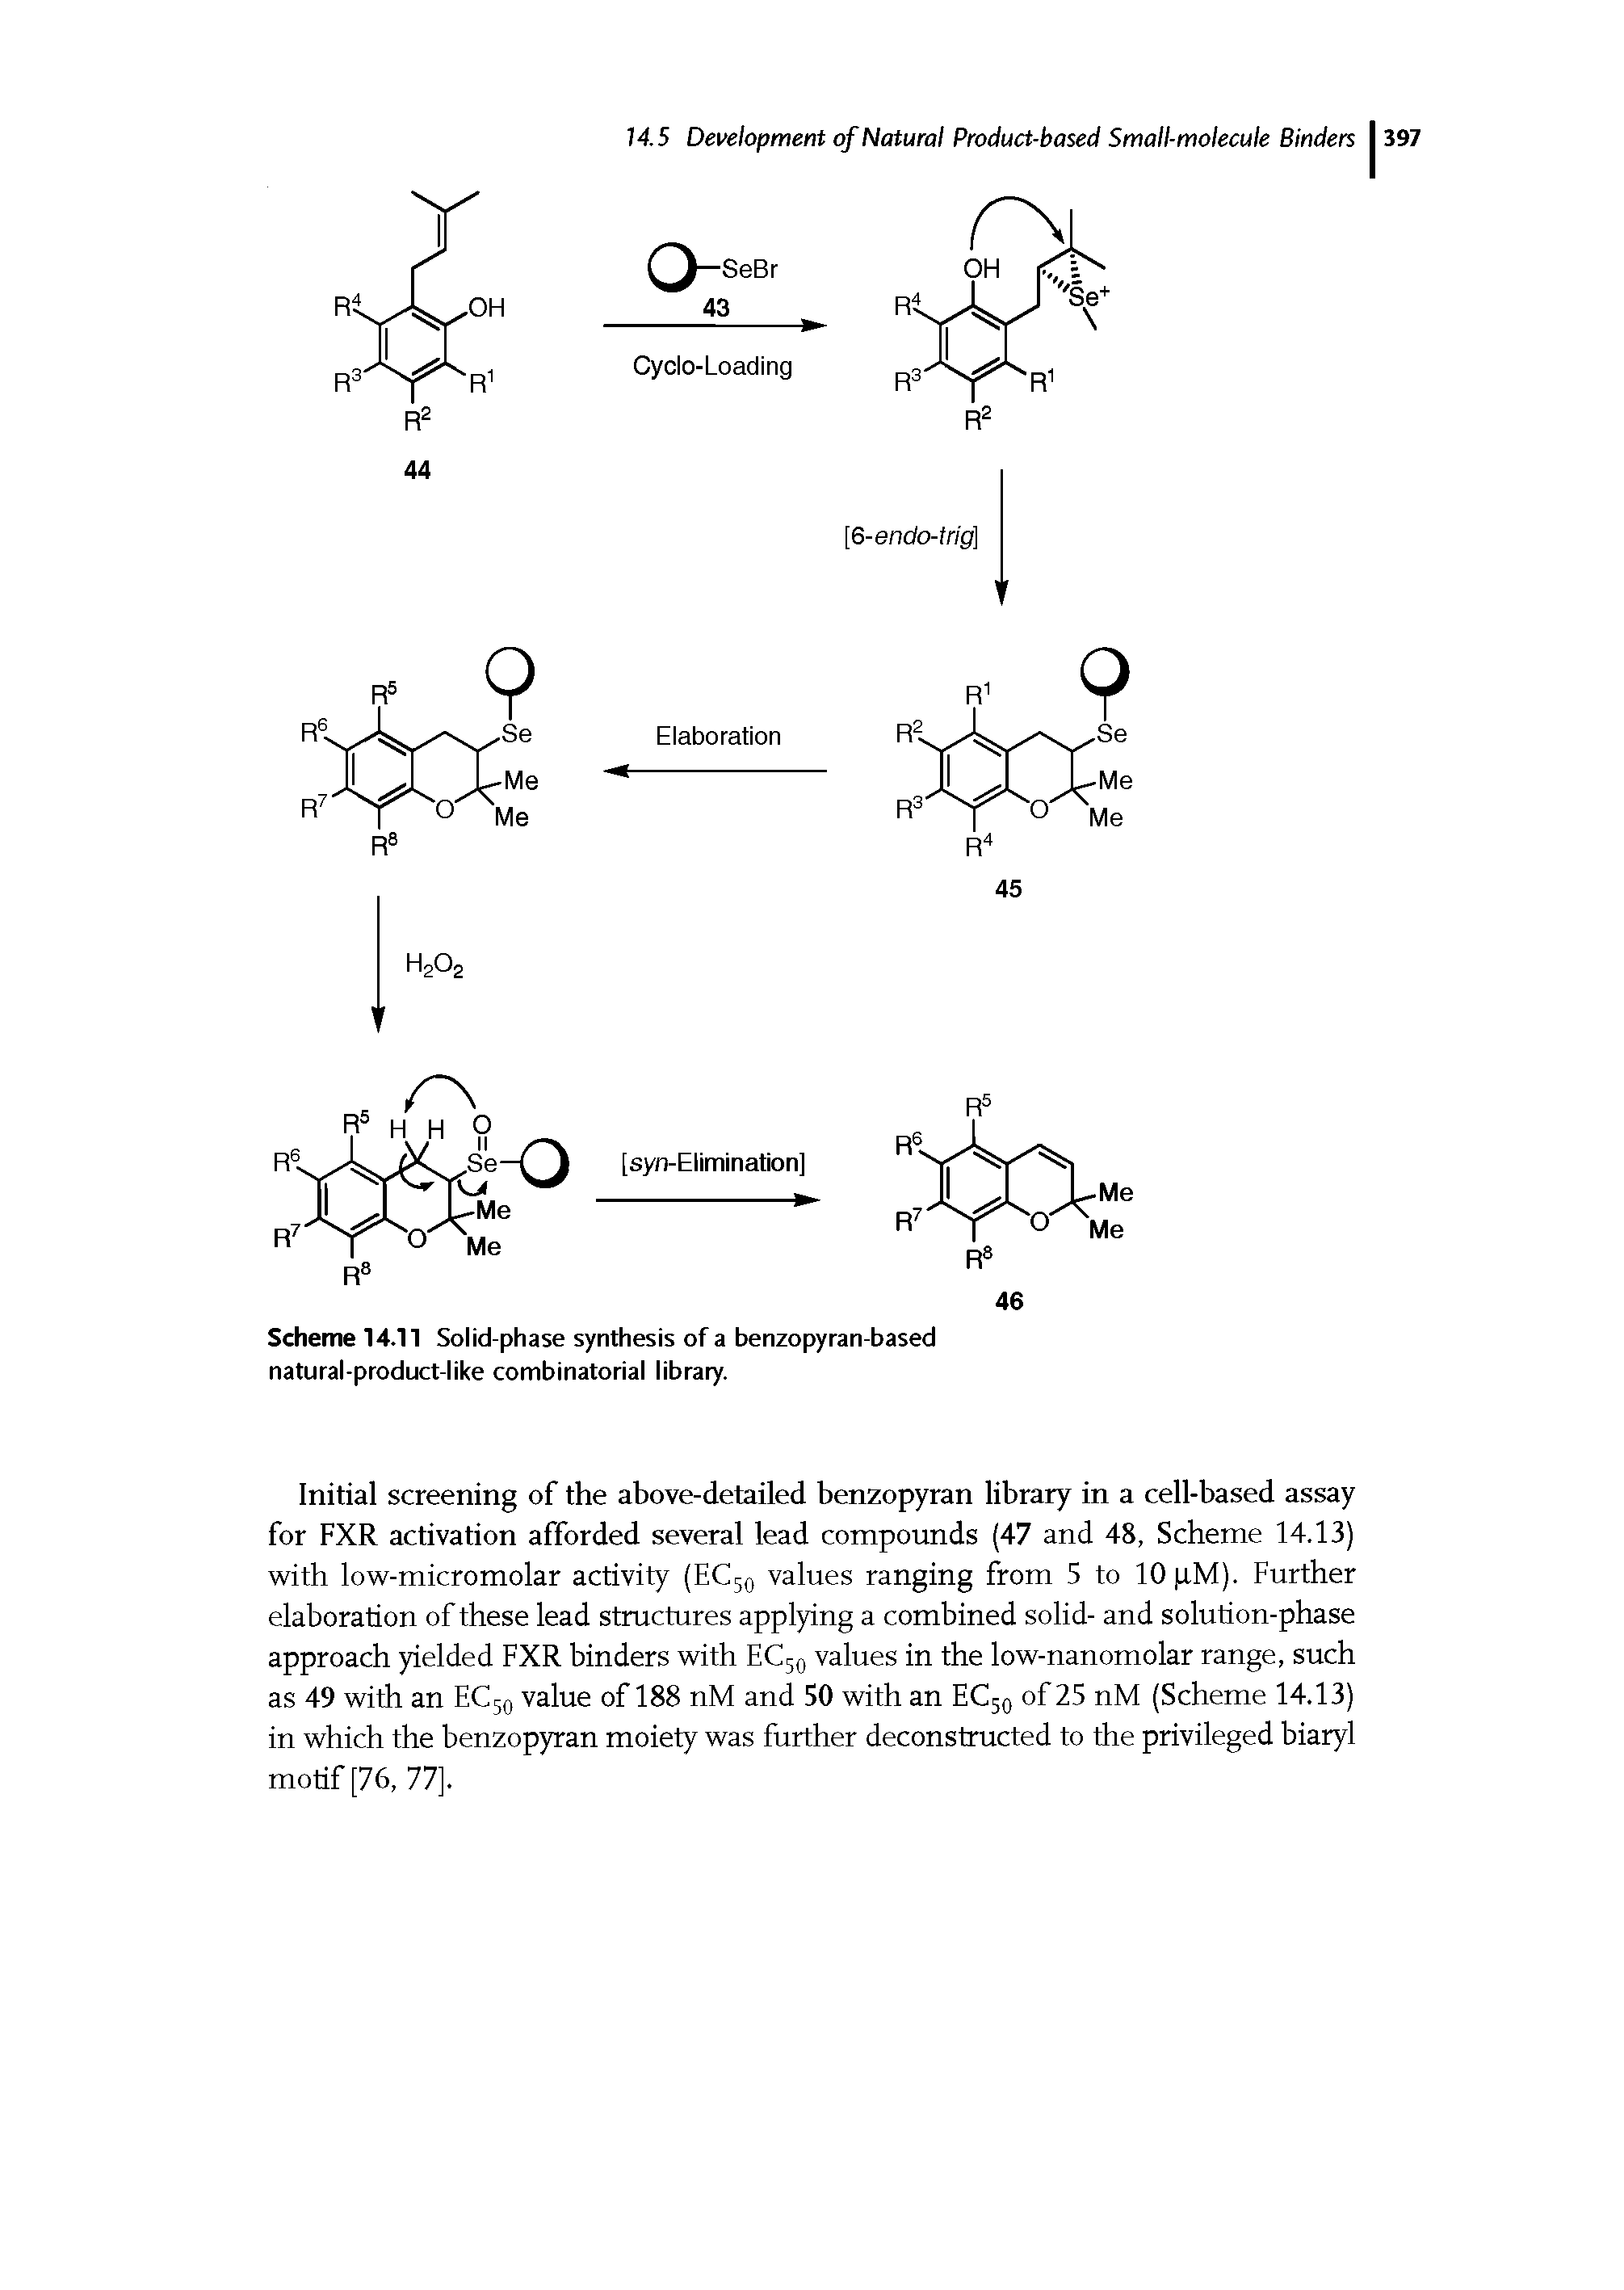 Scheme 14.11 Solid-phase synthesis of a benzopyran-based natural-product-like combinatorial library.